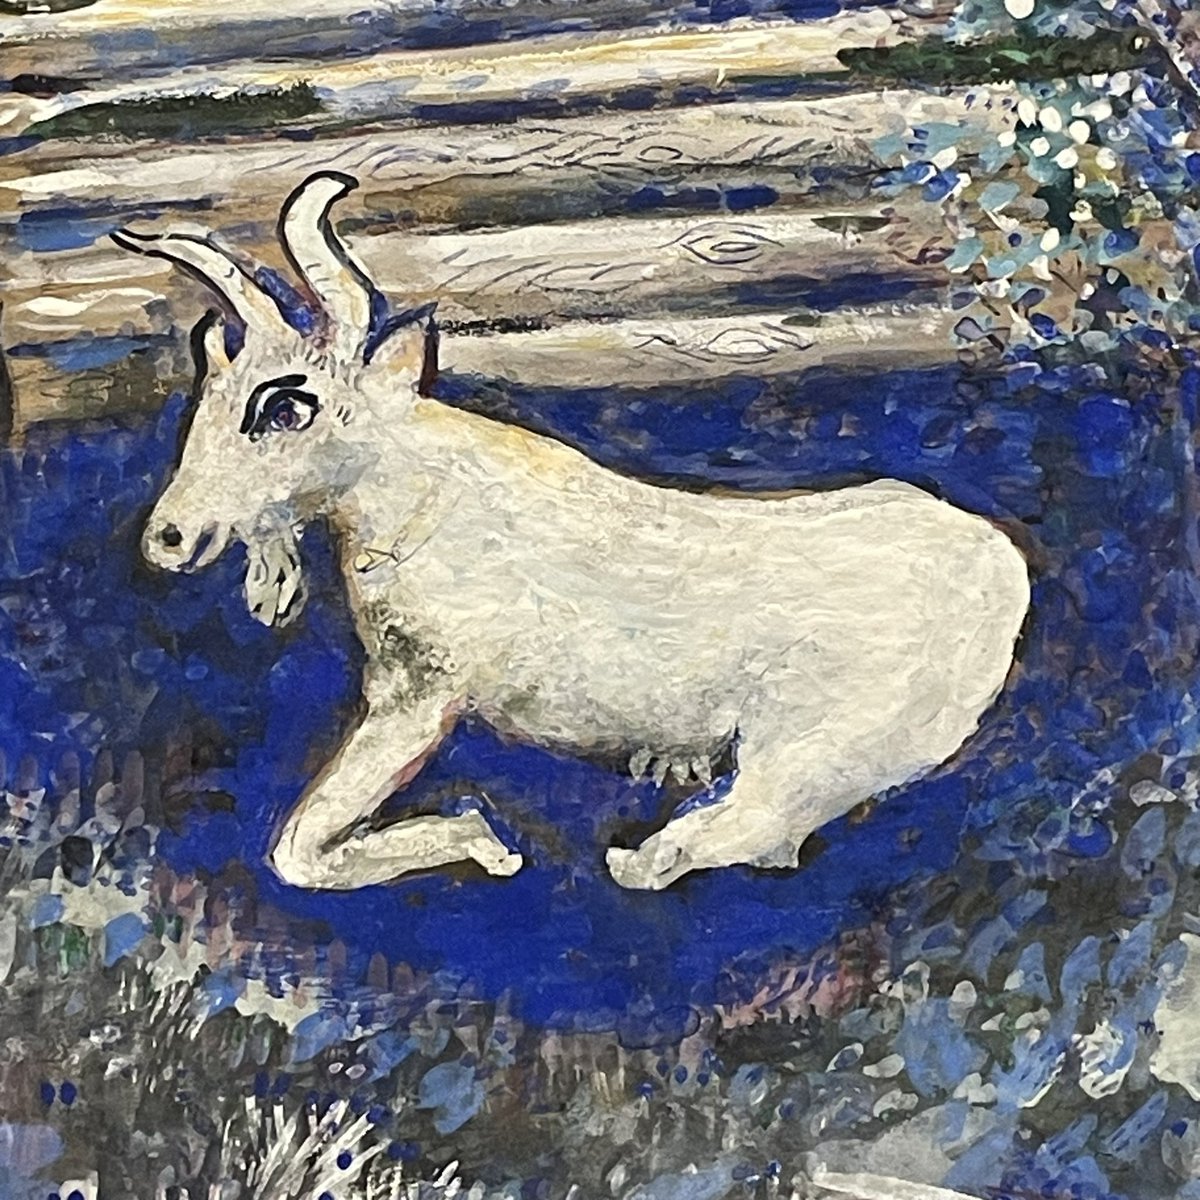 For anyone who needs a Chagall goat today (I certainly do …) 🐐